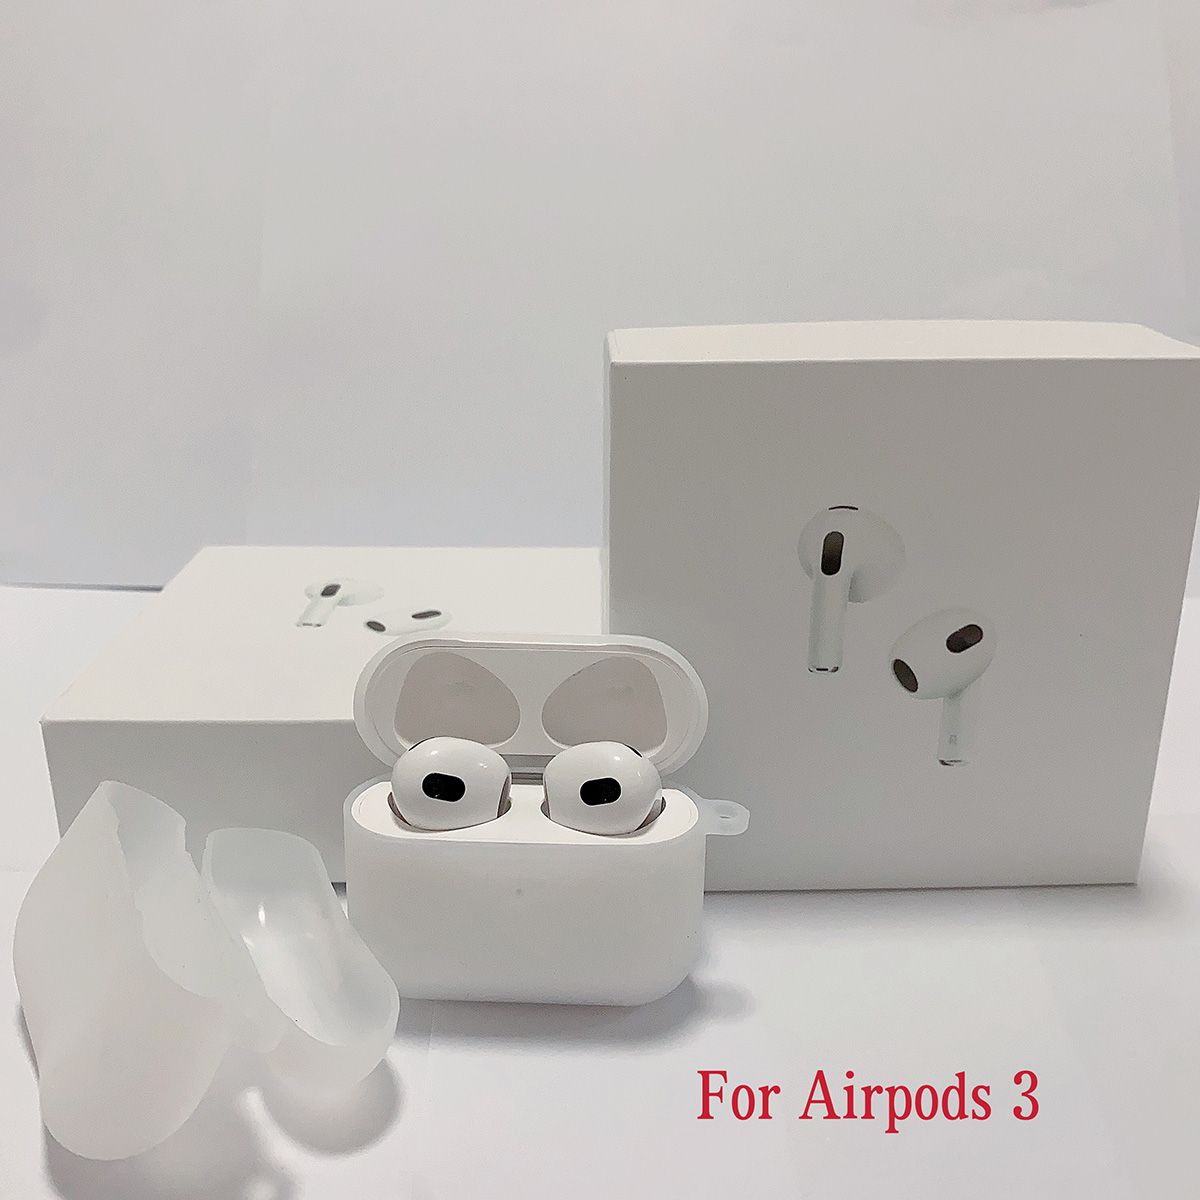 Pour AirPods 3